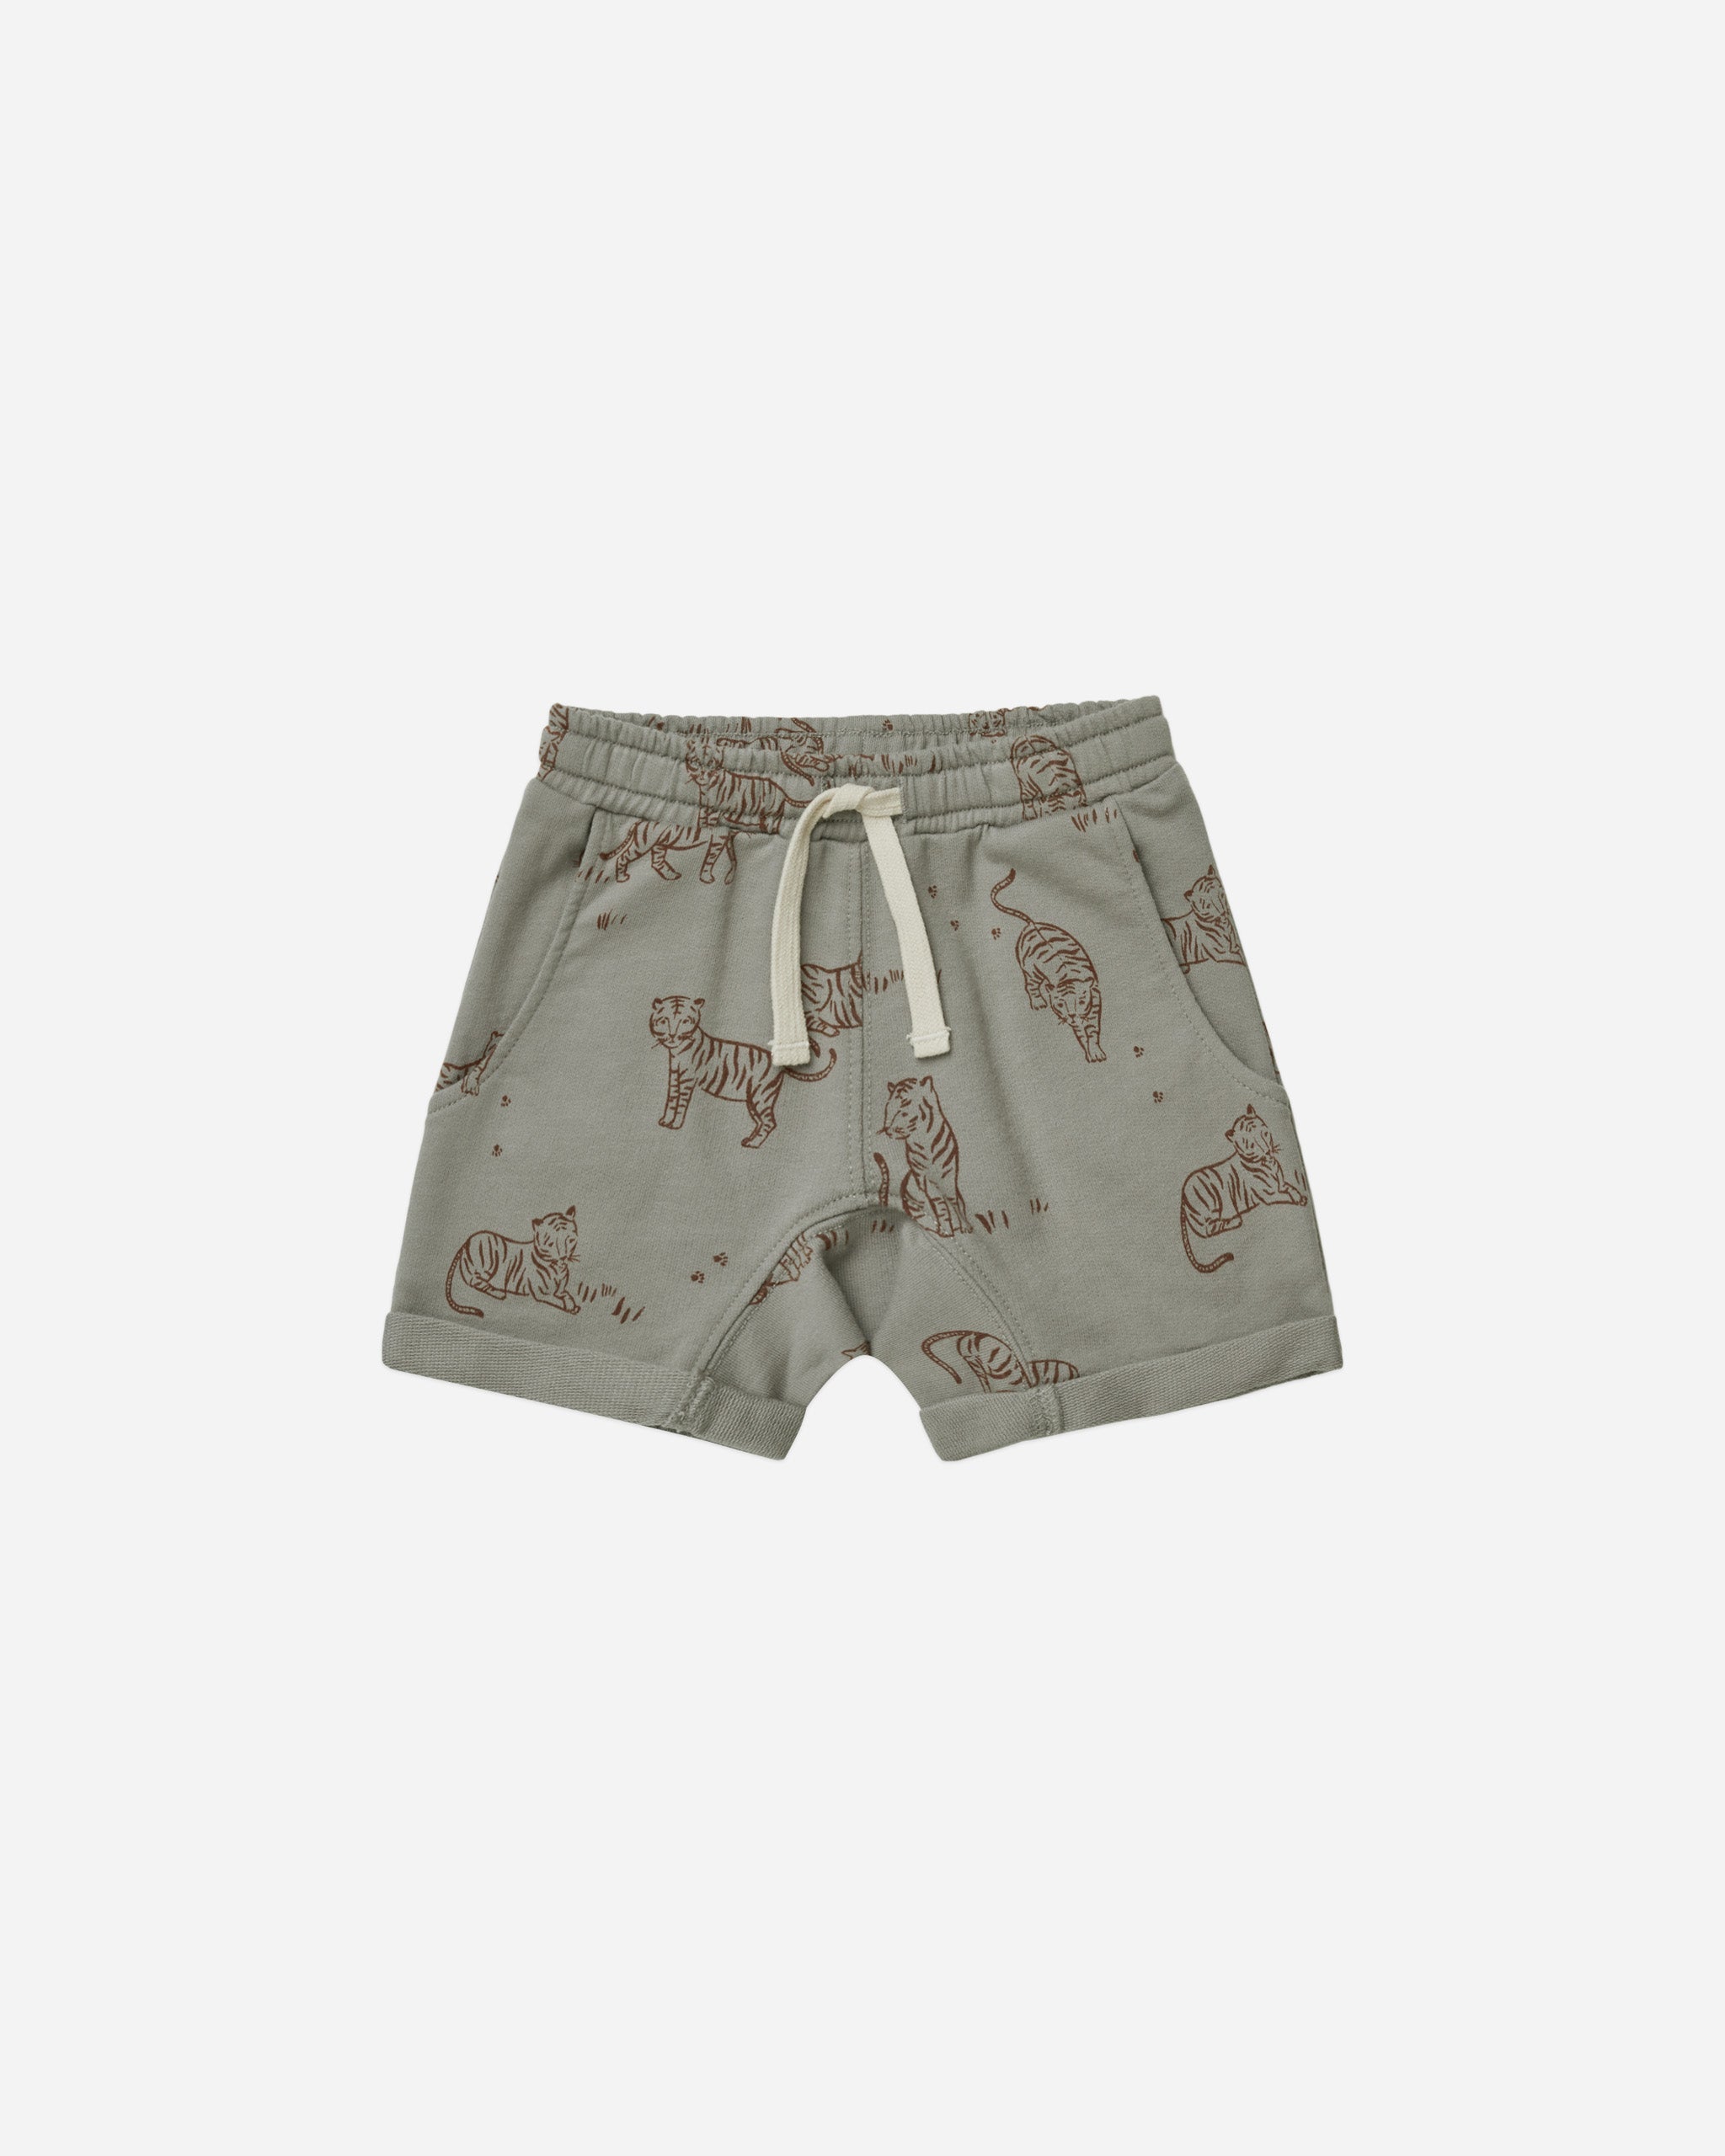 relaxed shorts || tigers - Rylee + Cru | Kids Clothes | Trendy Baby Clothes | Modern Infant Outfits |